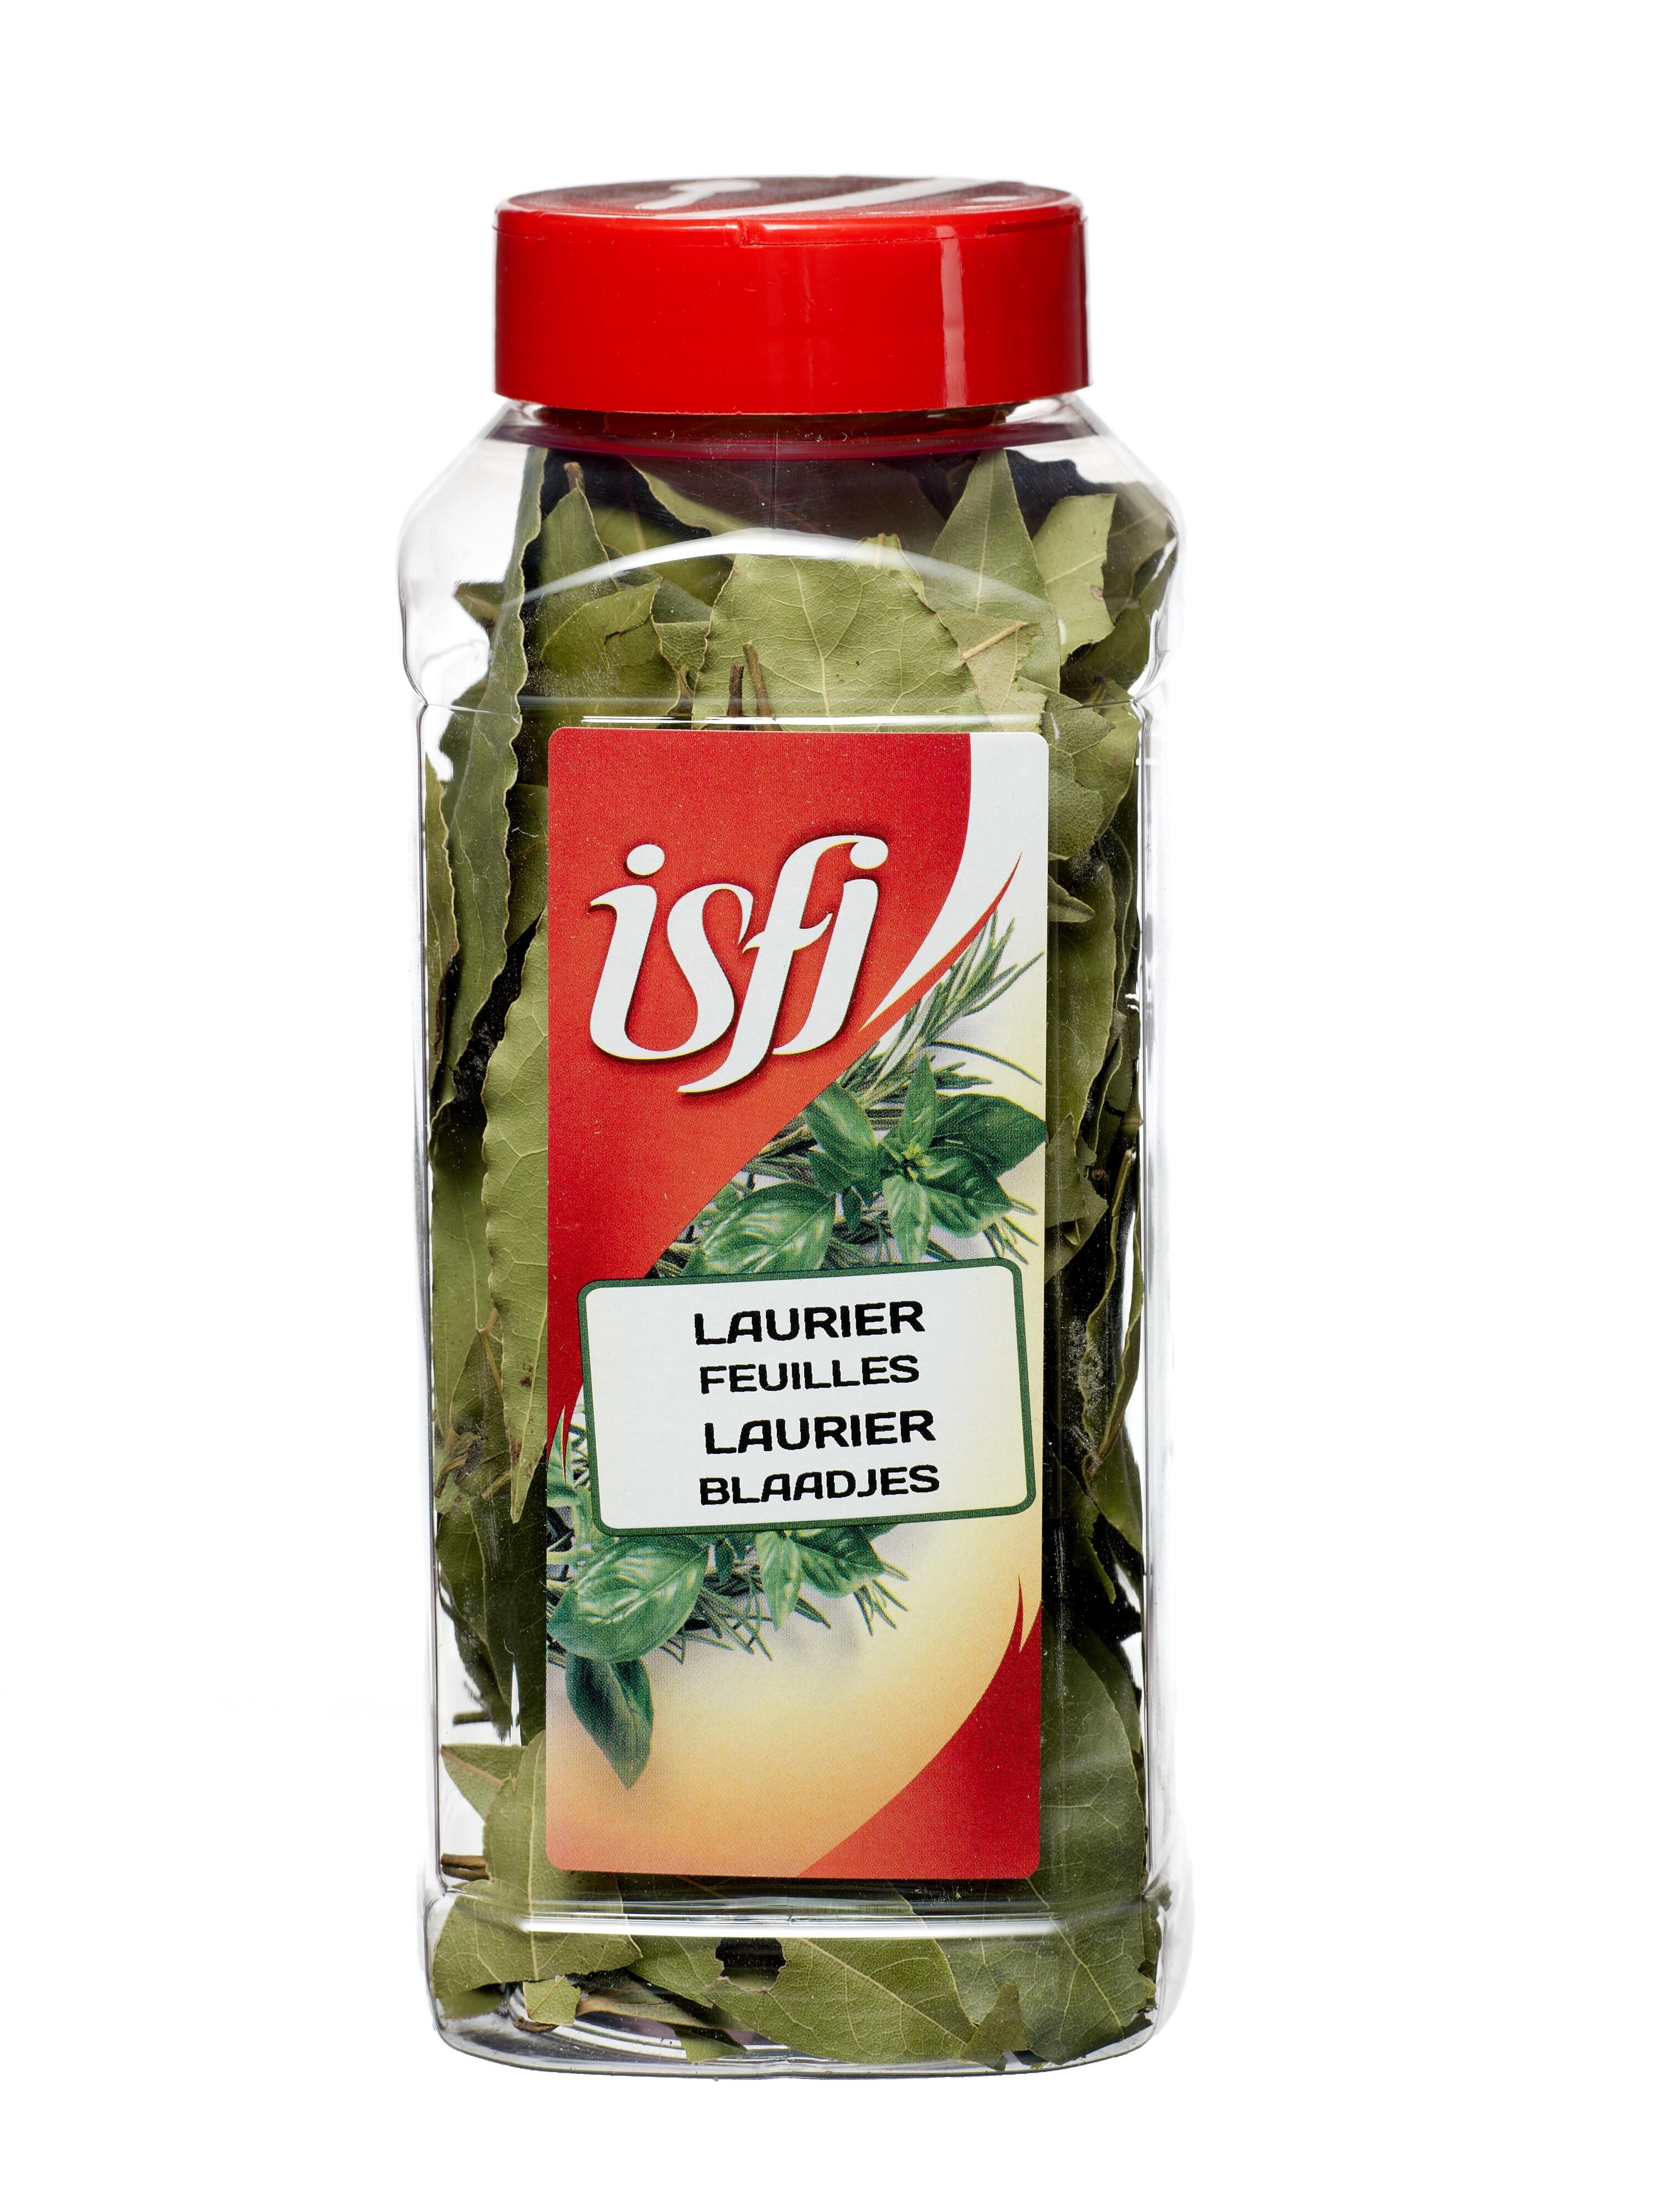 Bay Leaves Dried 30gr Pet Jar Isfi Spices